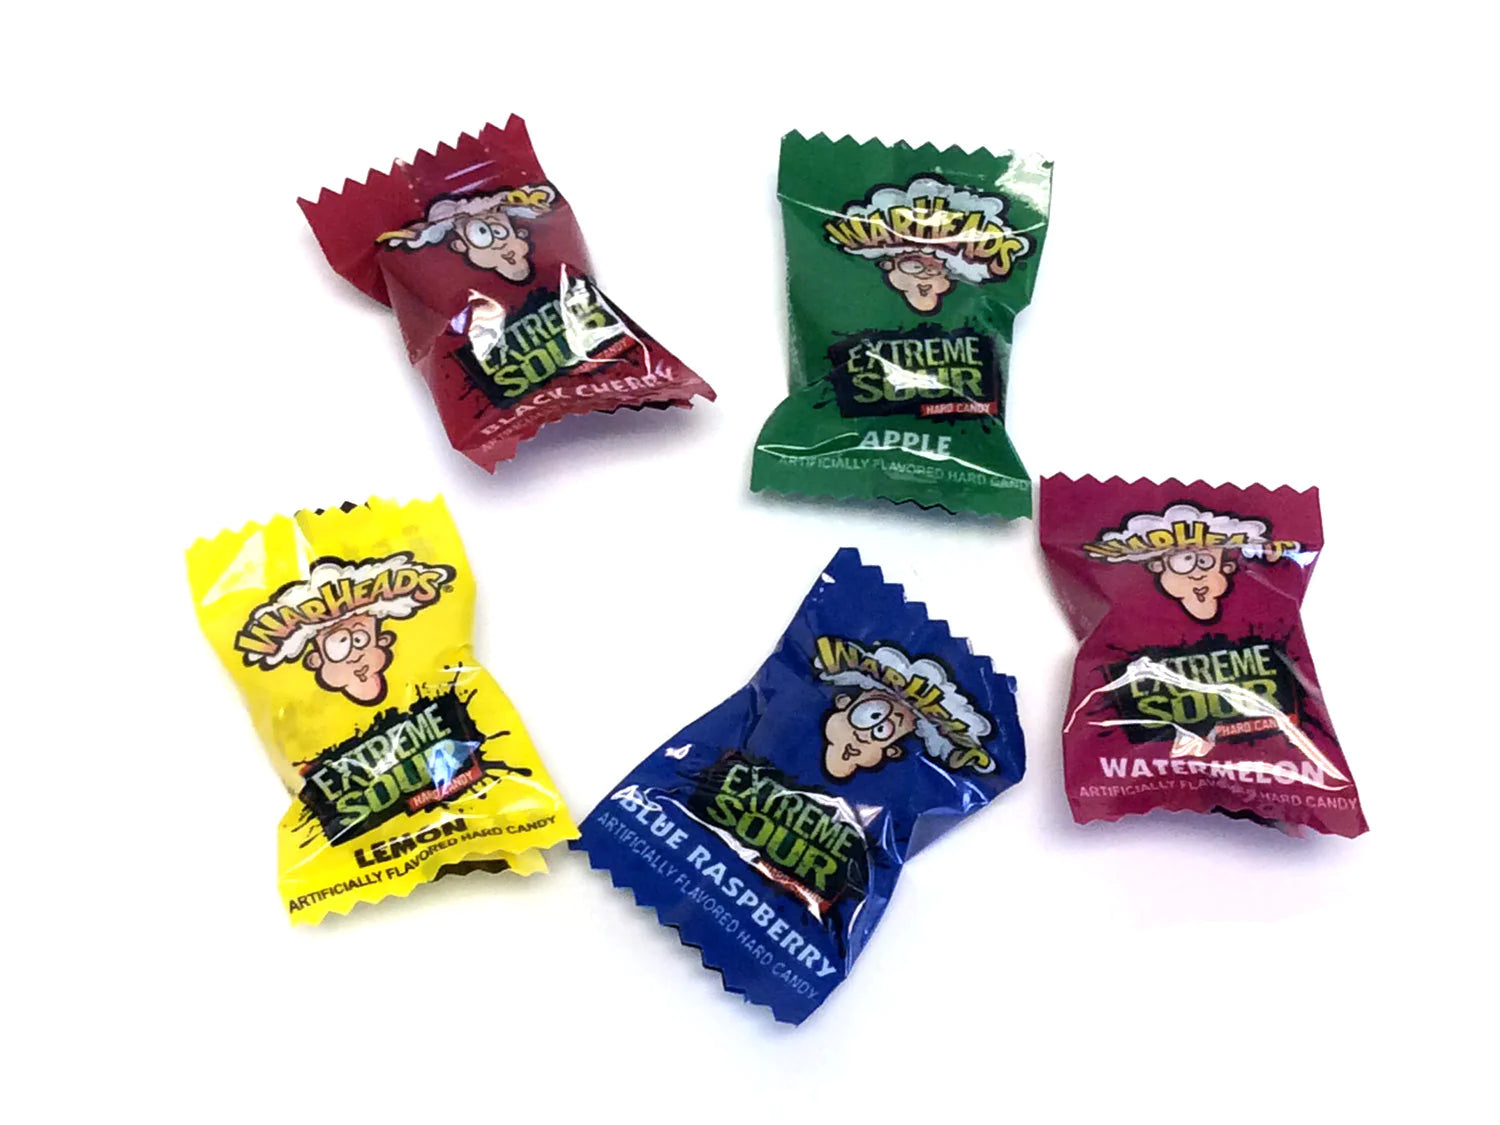 Warheads candy for cycling